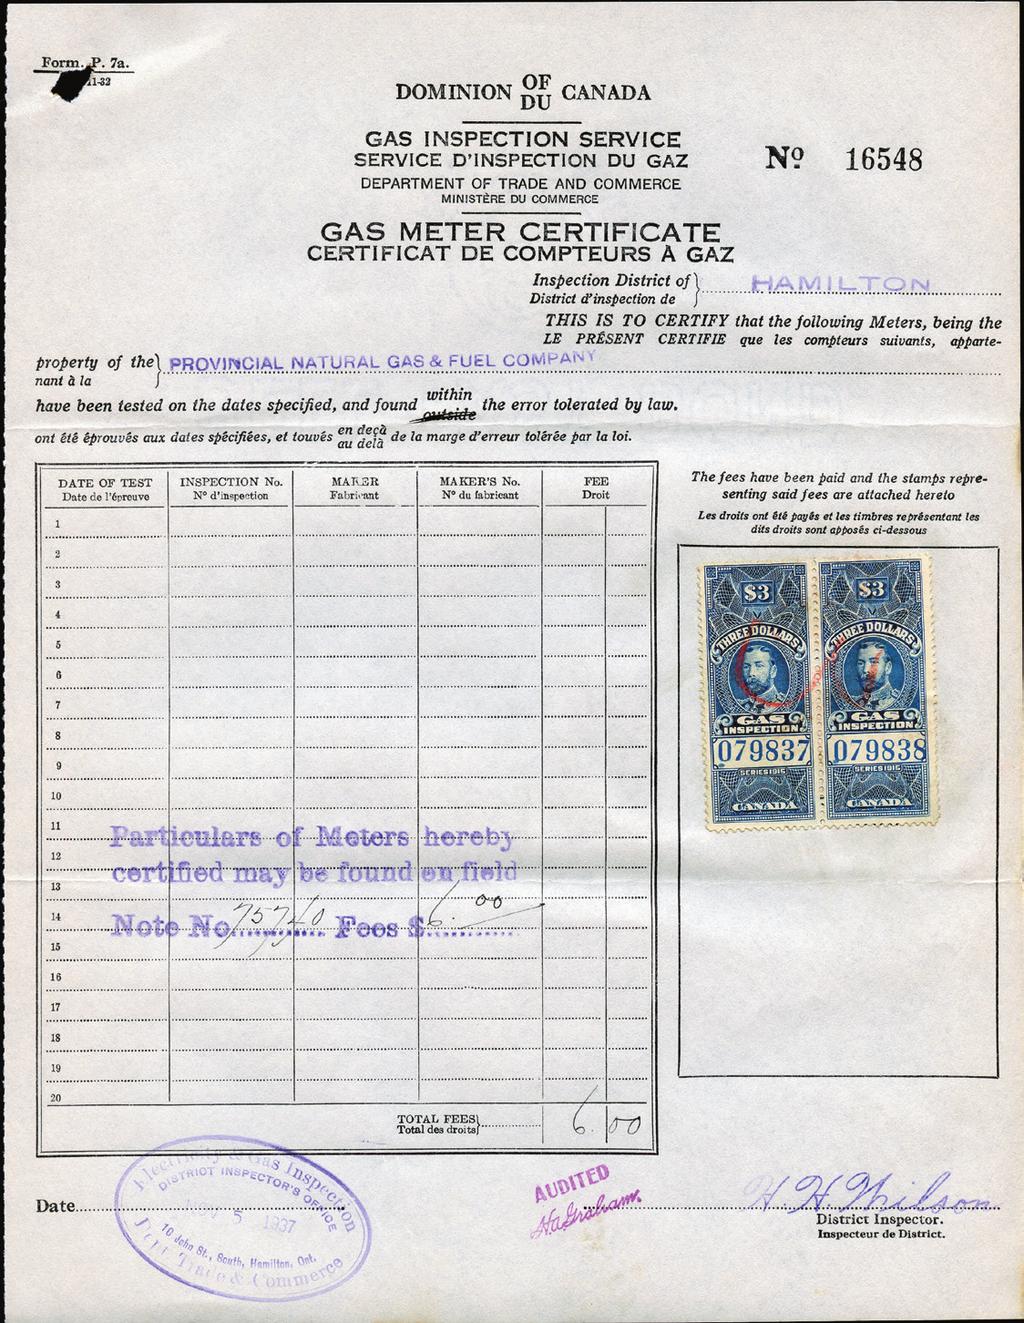 1930 s Dominion of Canada Gas Inspection Service Gas Meter certificate used at Hamilton, Ontario.